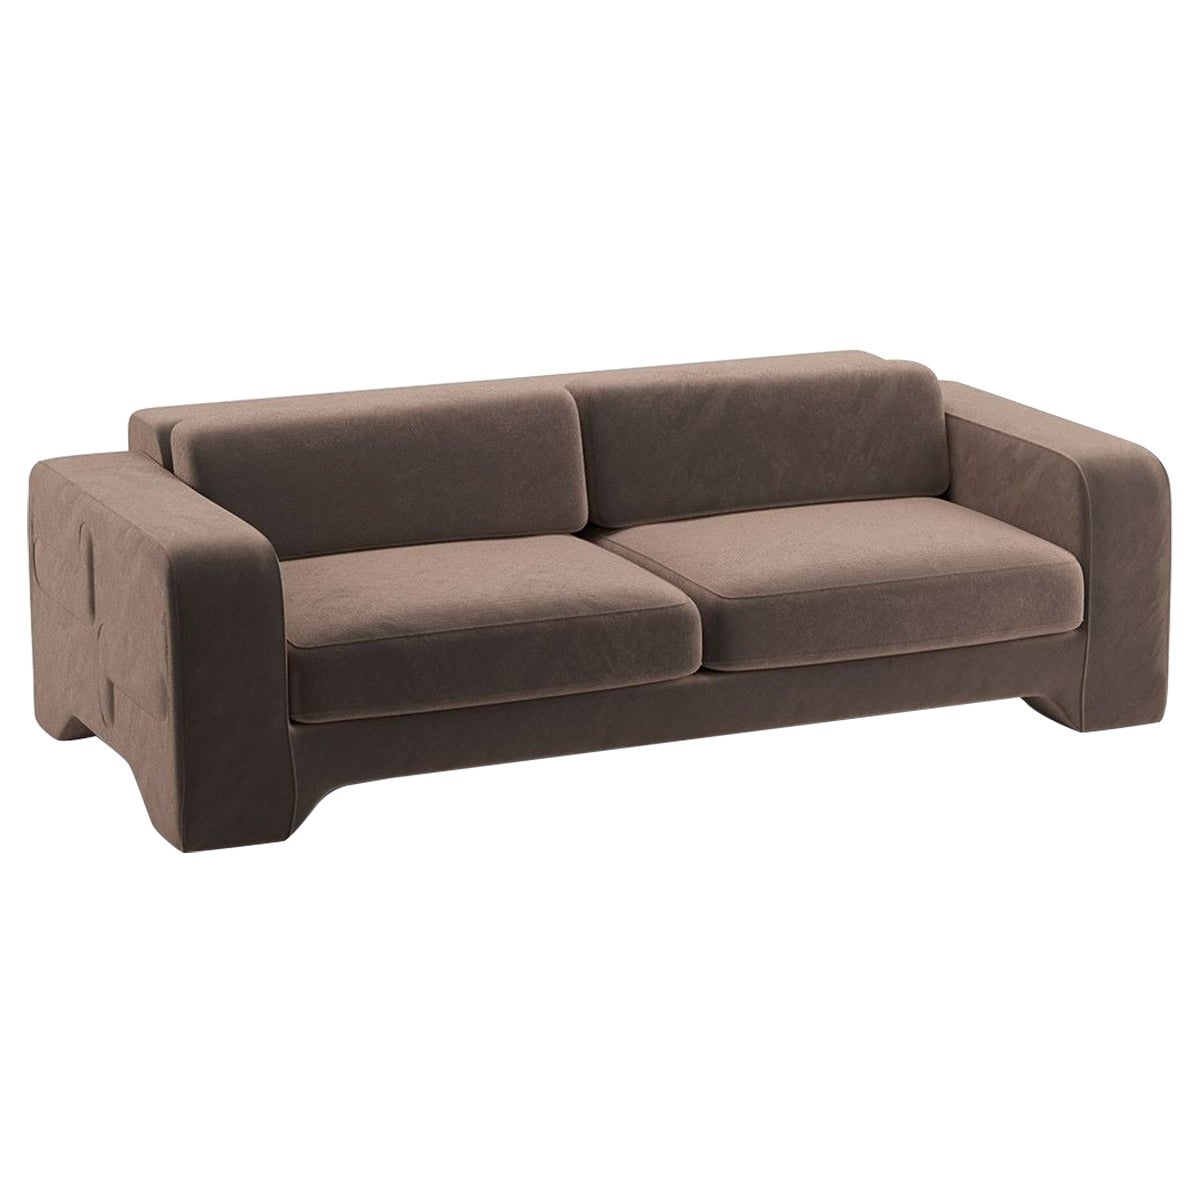 Popus Editions Giovanna 3 Seater Sofa in Mole Como Velvet Upholstery For Sale